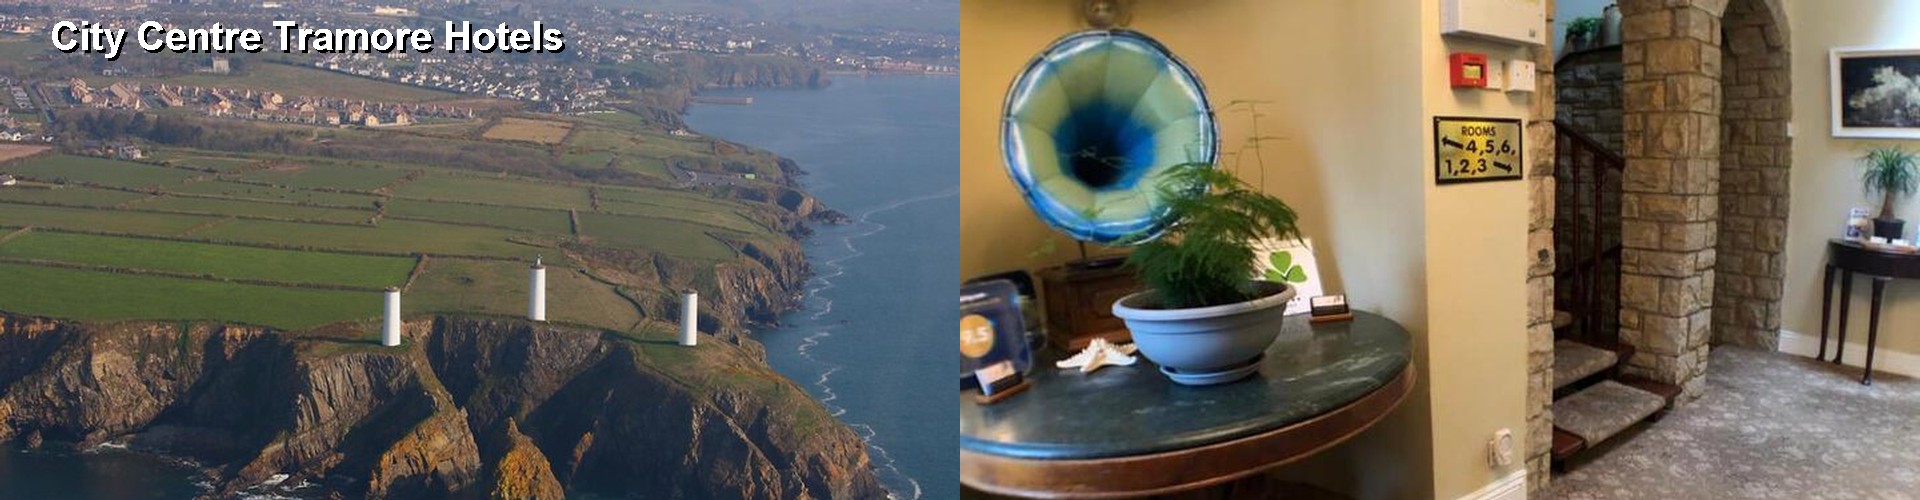 5 Best Hotels near City Centre Tramore